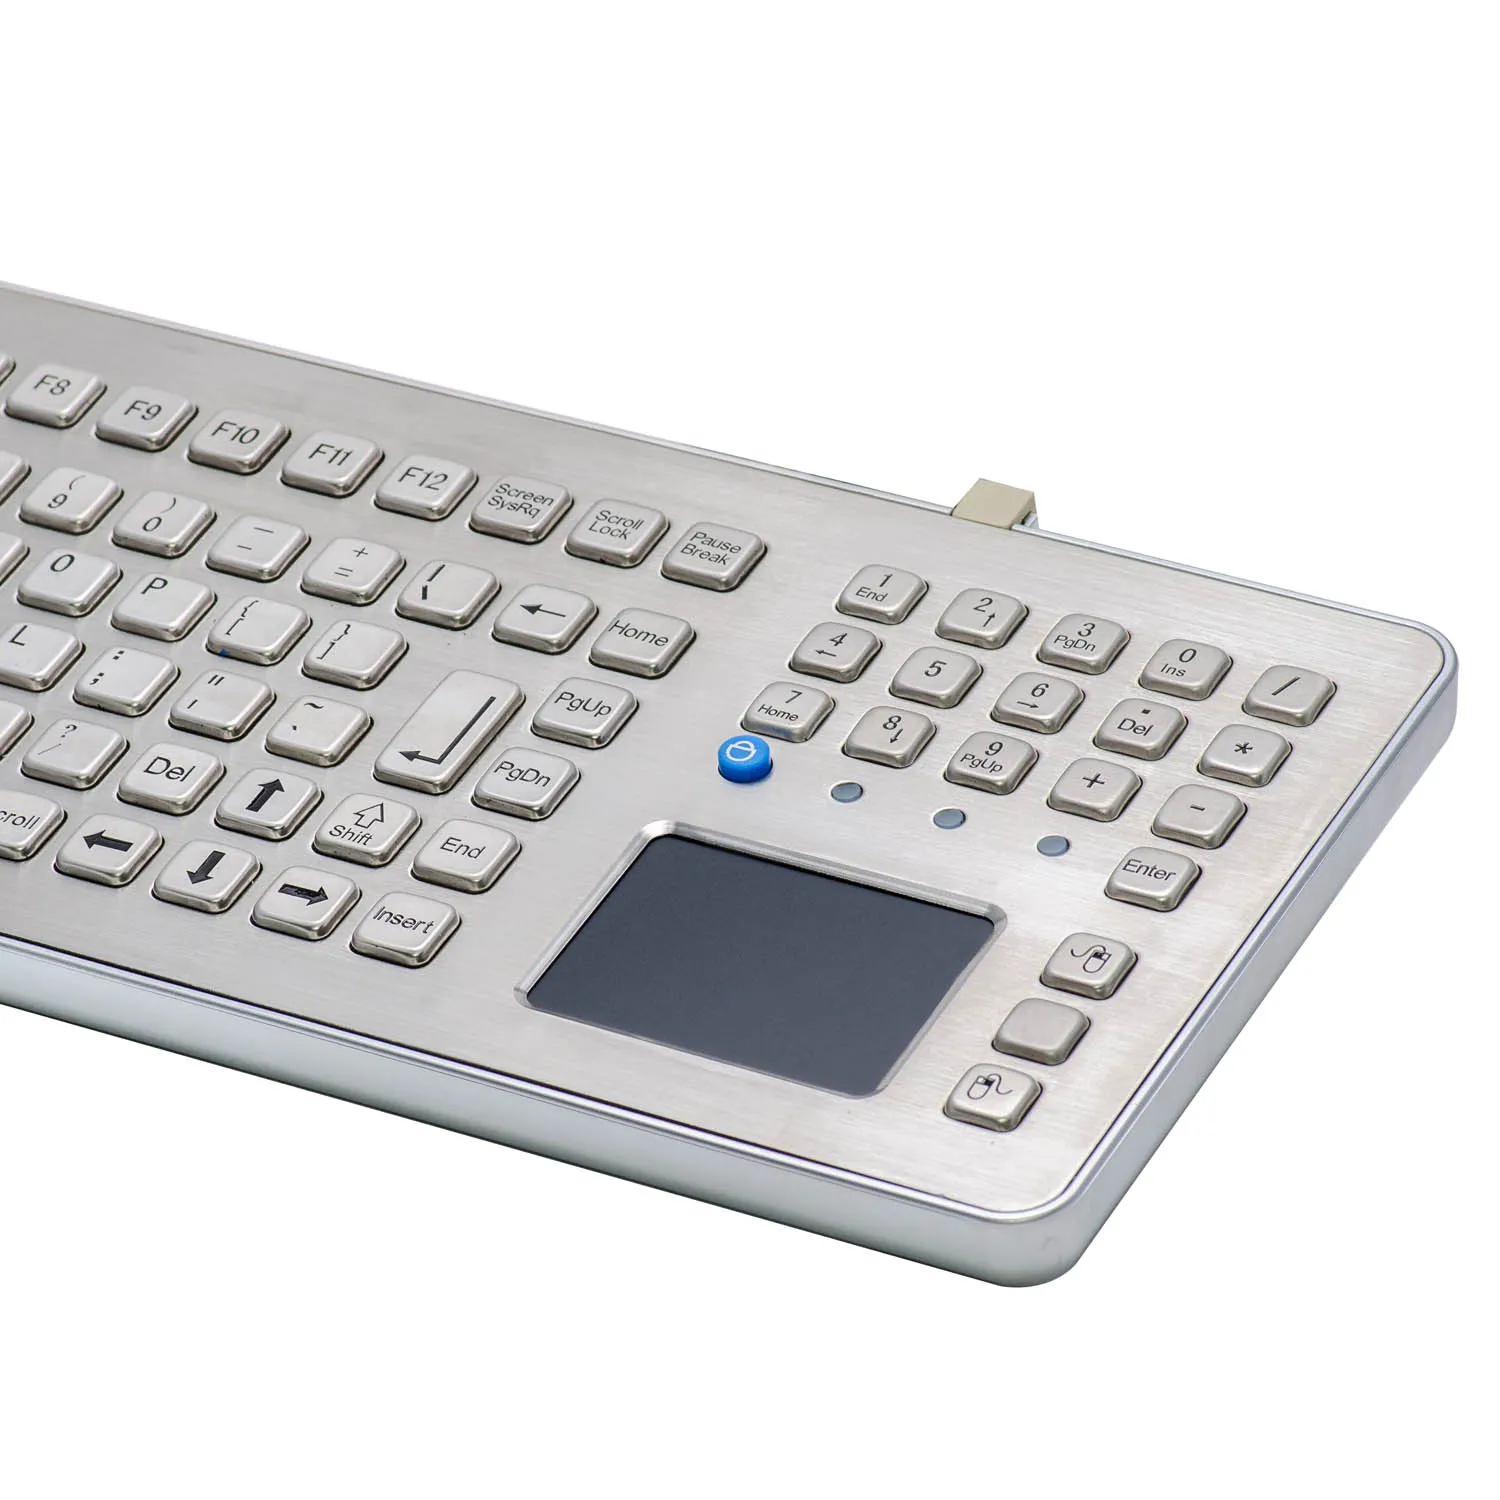 KB-000-NW0S0P2 desk touchpad